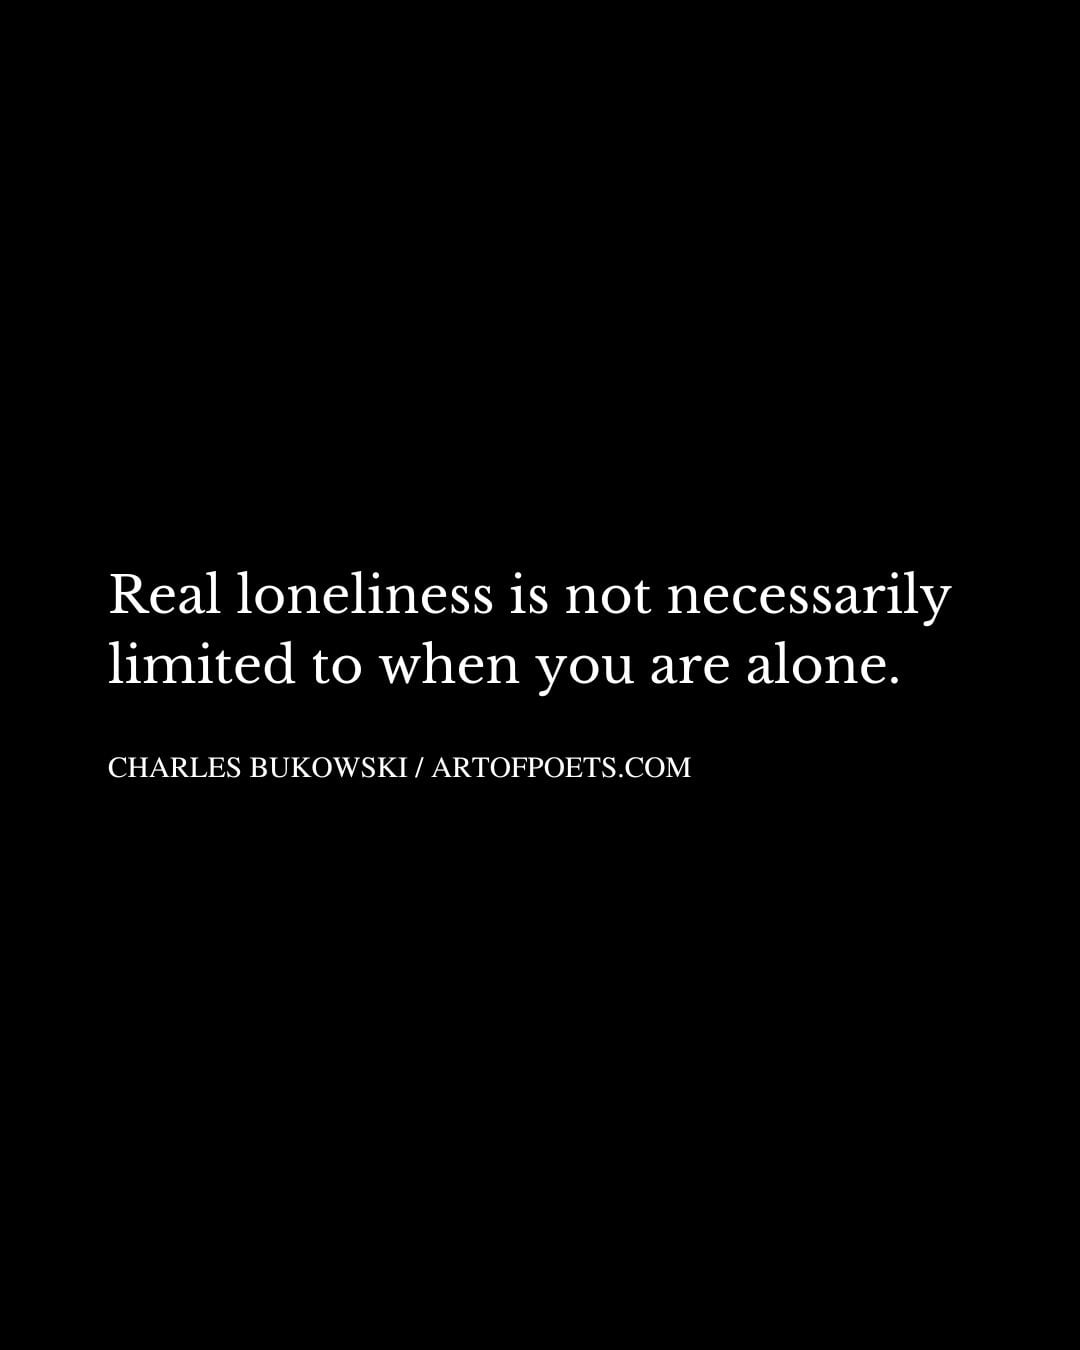 Real loneliness is not necessarily limited to when you are alone